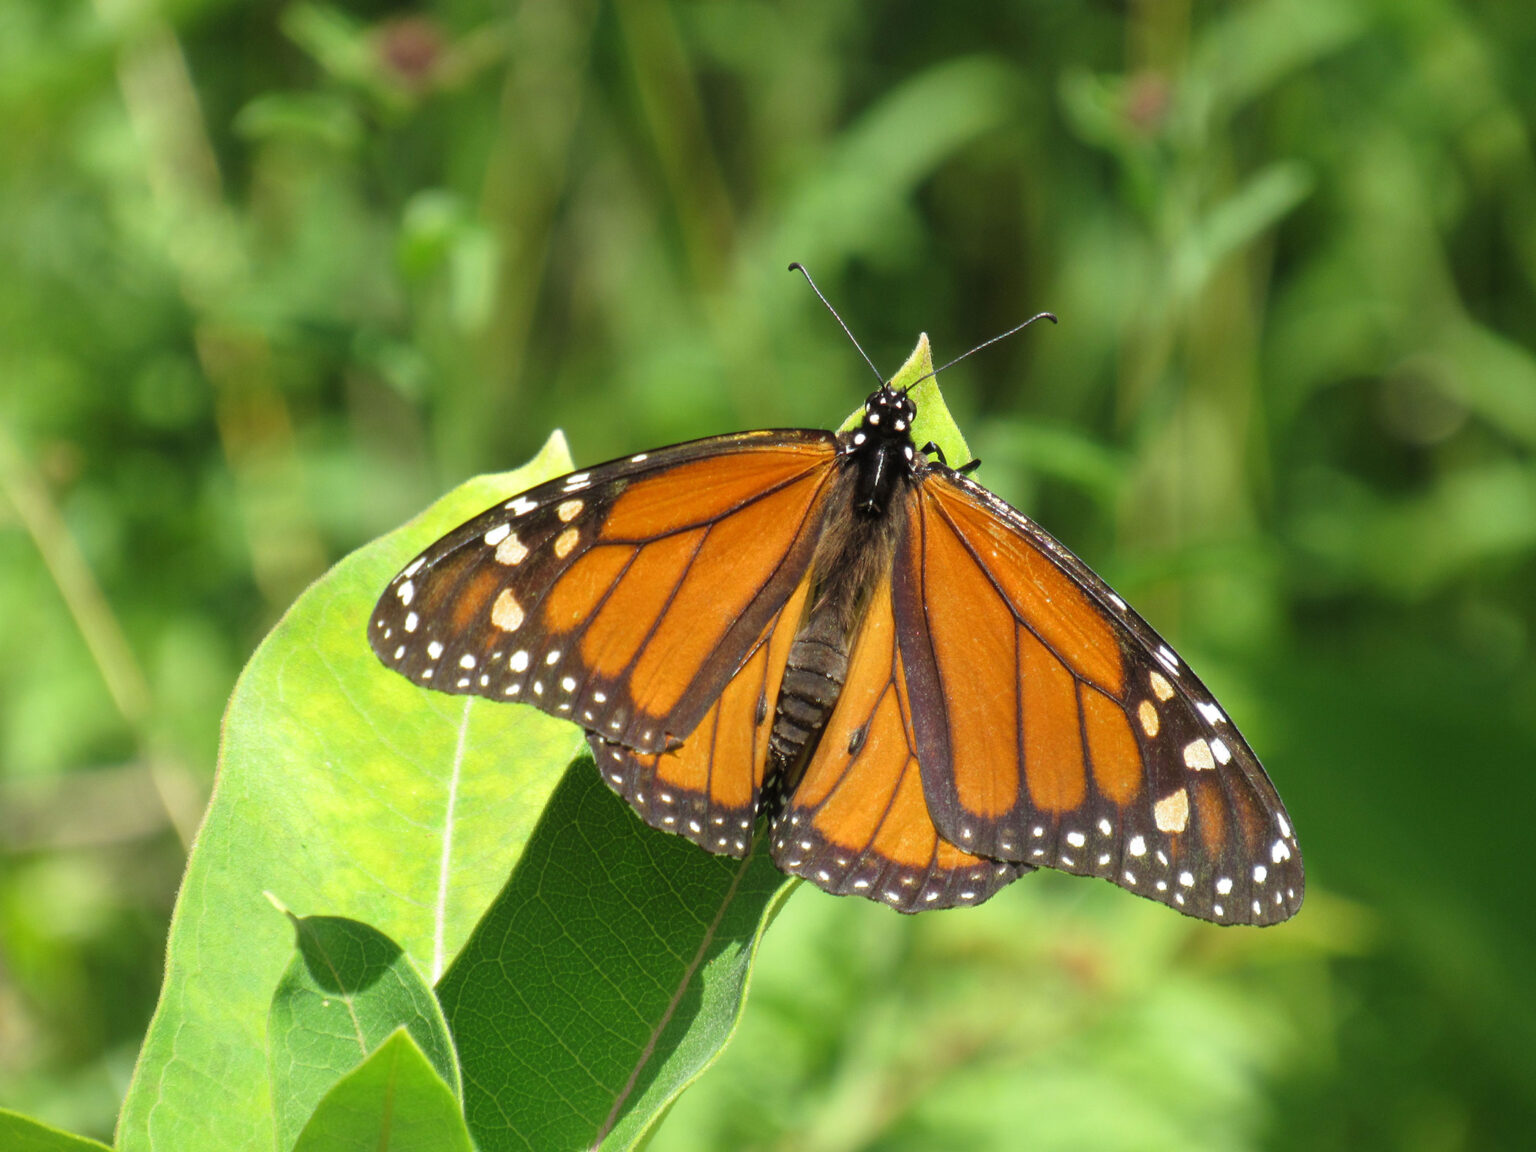 A monarch butterfly rests on a leaf in Nova Scotia, Canada. (Photo courtesy of Pat Davis)